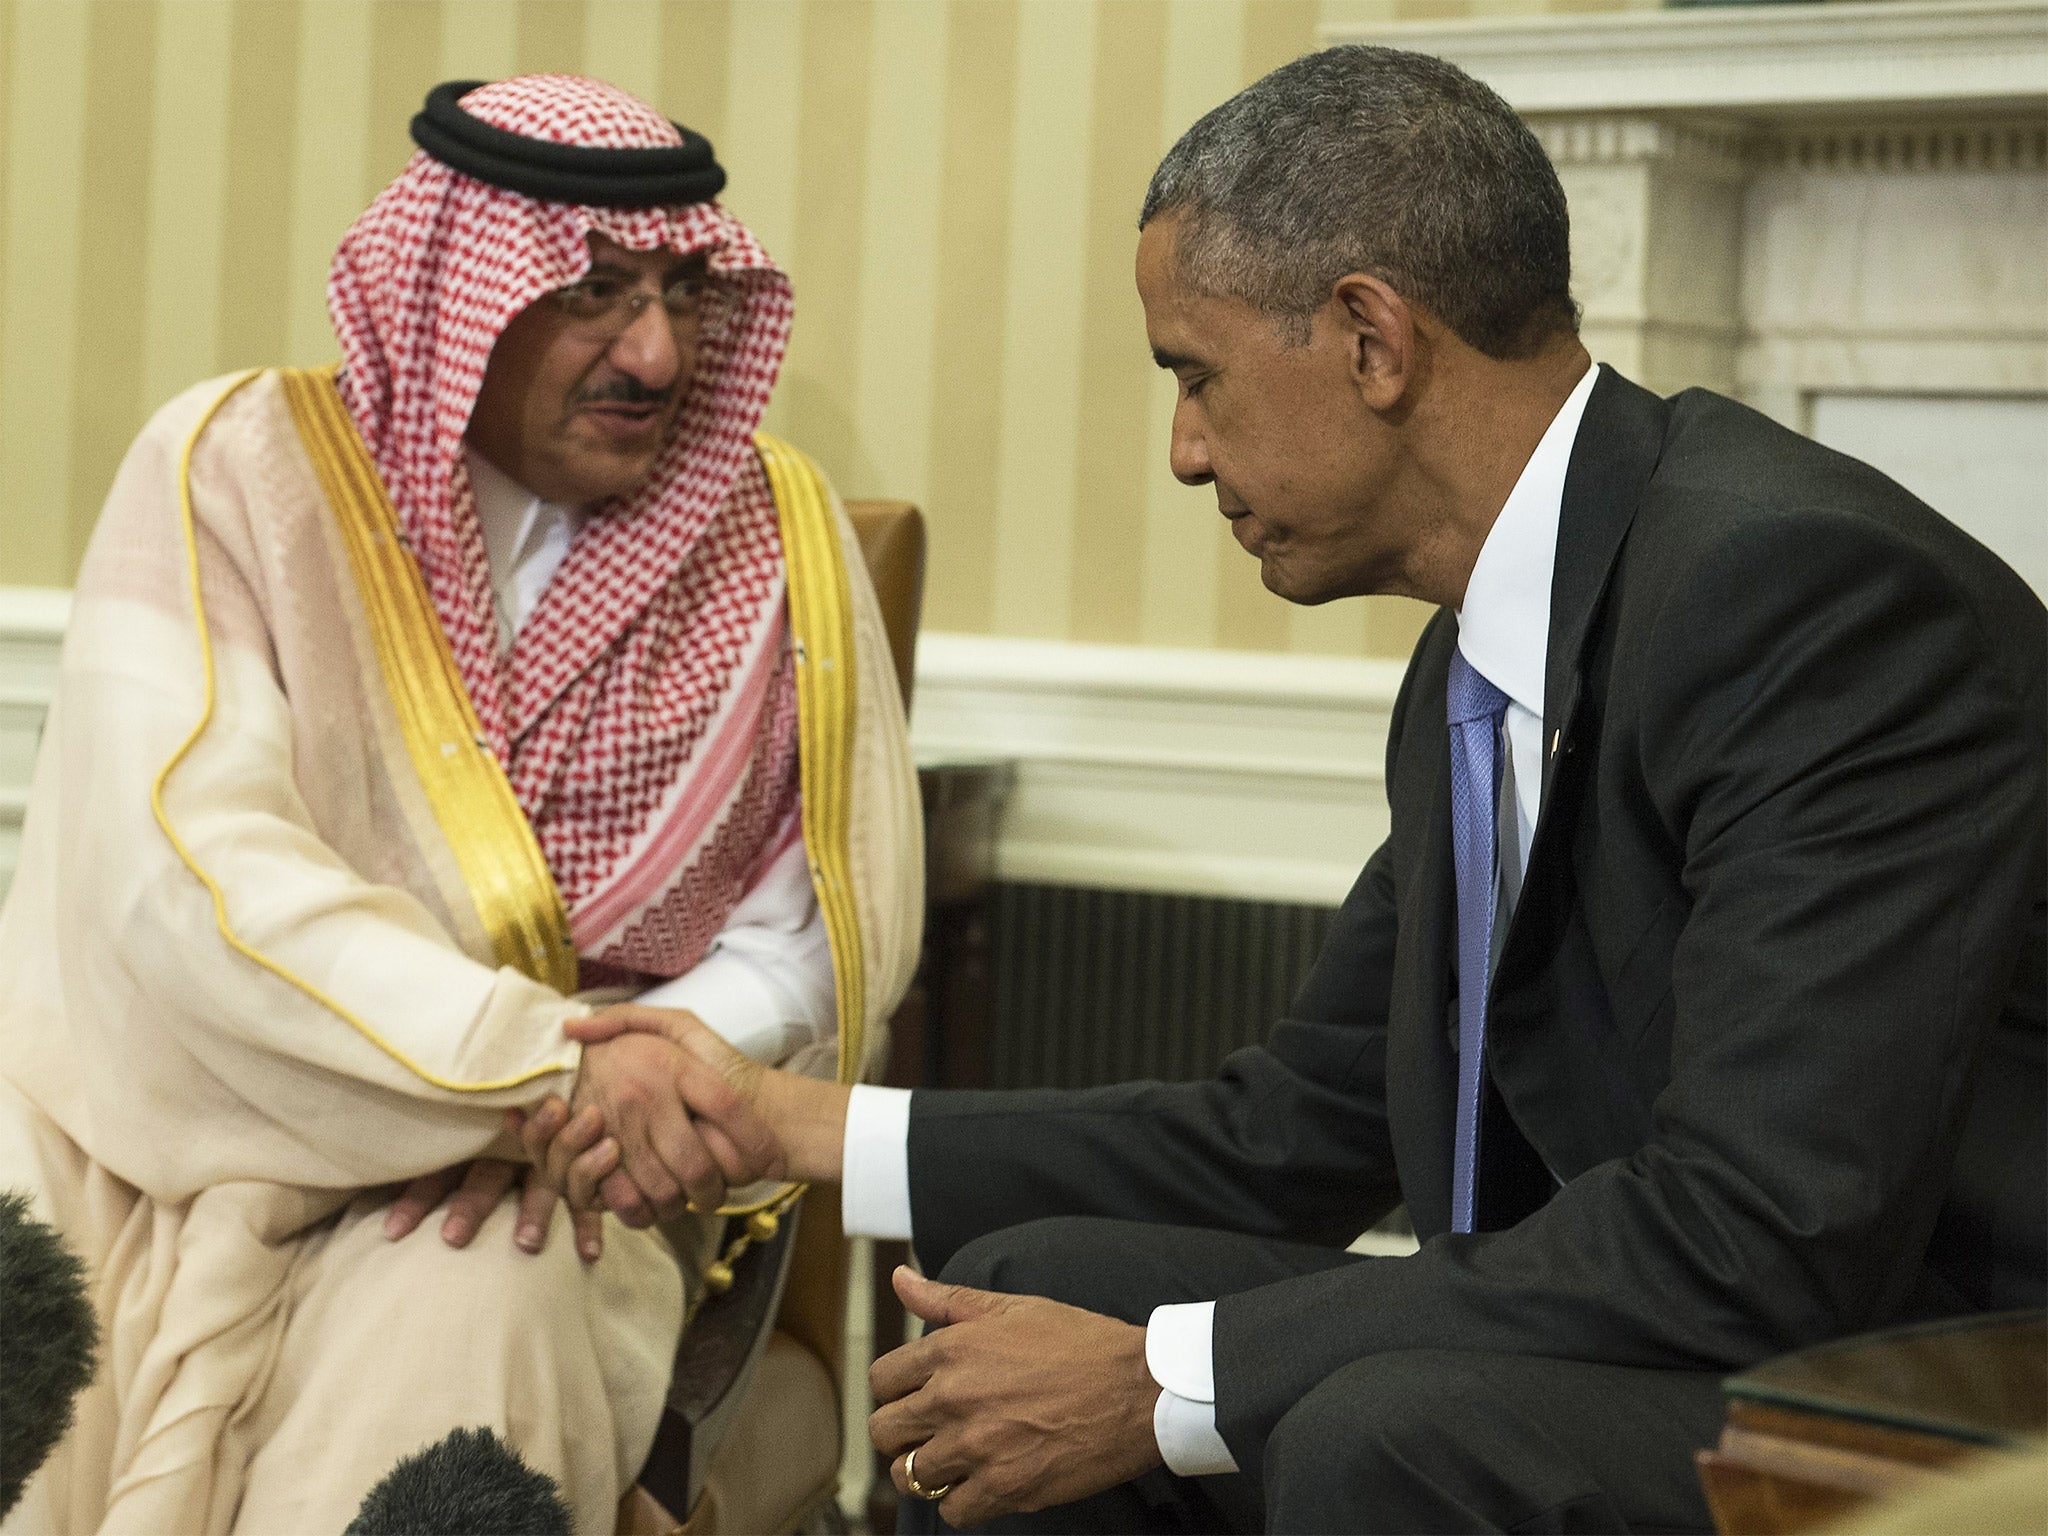 Crown Prince Mohammed bin Nayef shakes hands with President Obama during a meeting in the Oval Office on Wednesday